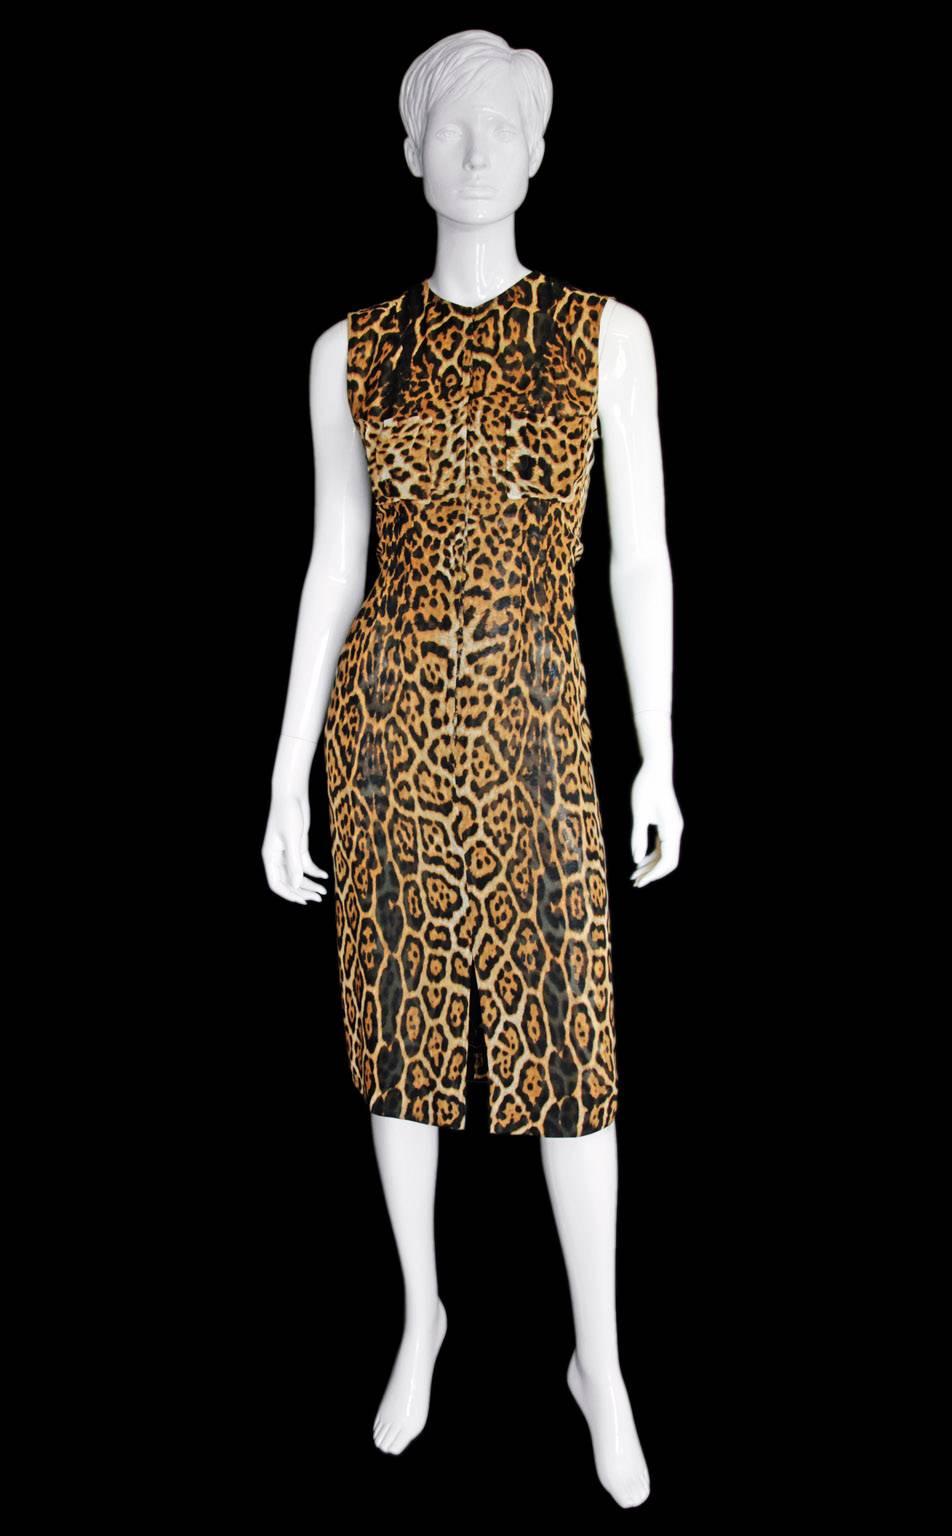 Beautifully Detailed Tom Ford For YSL Rive Gauche Spring Summer 2002 Safari Collection Silk Dress!

Exquisite silk knee-length dress from Tom Ford's acclaimed Spring/Summer 2002 Safari/Mombasa Collection for YSL Rive Gauche. This very special